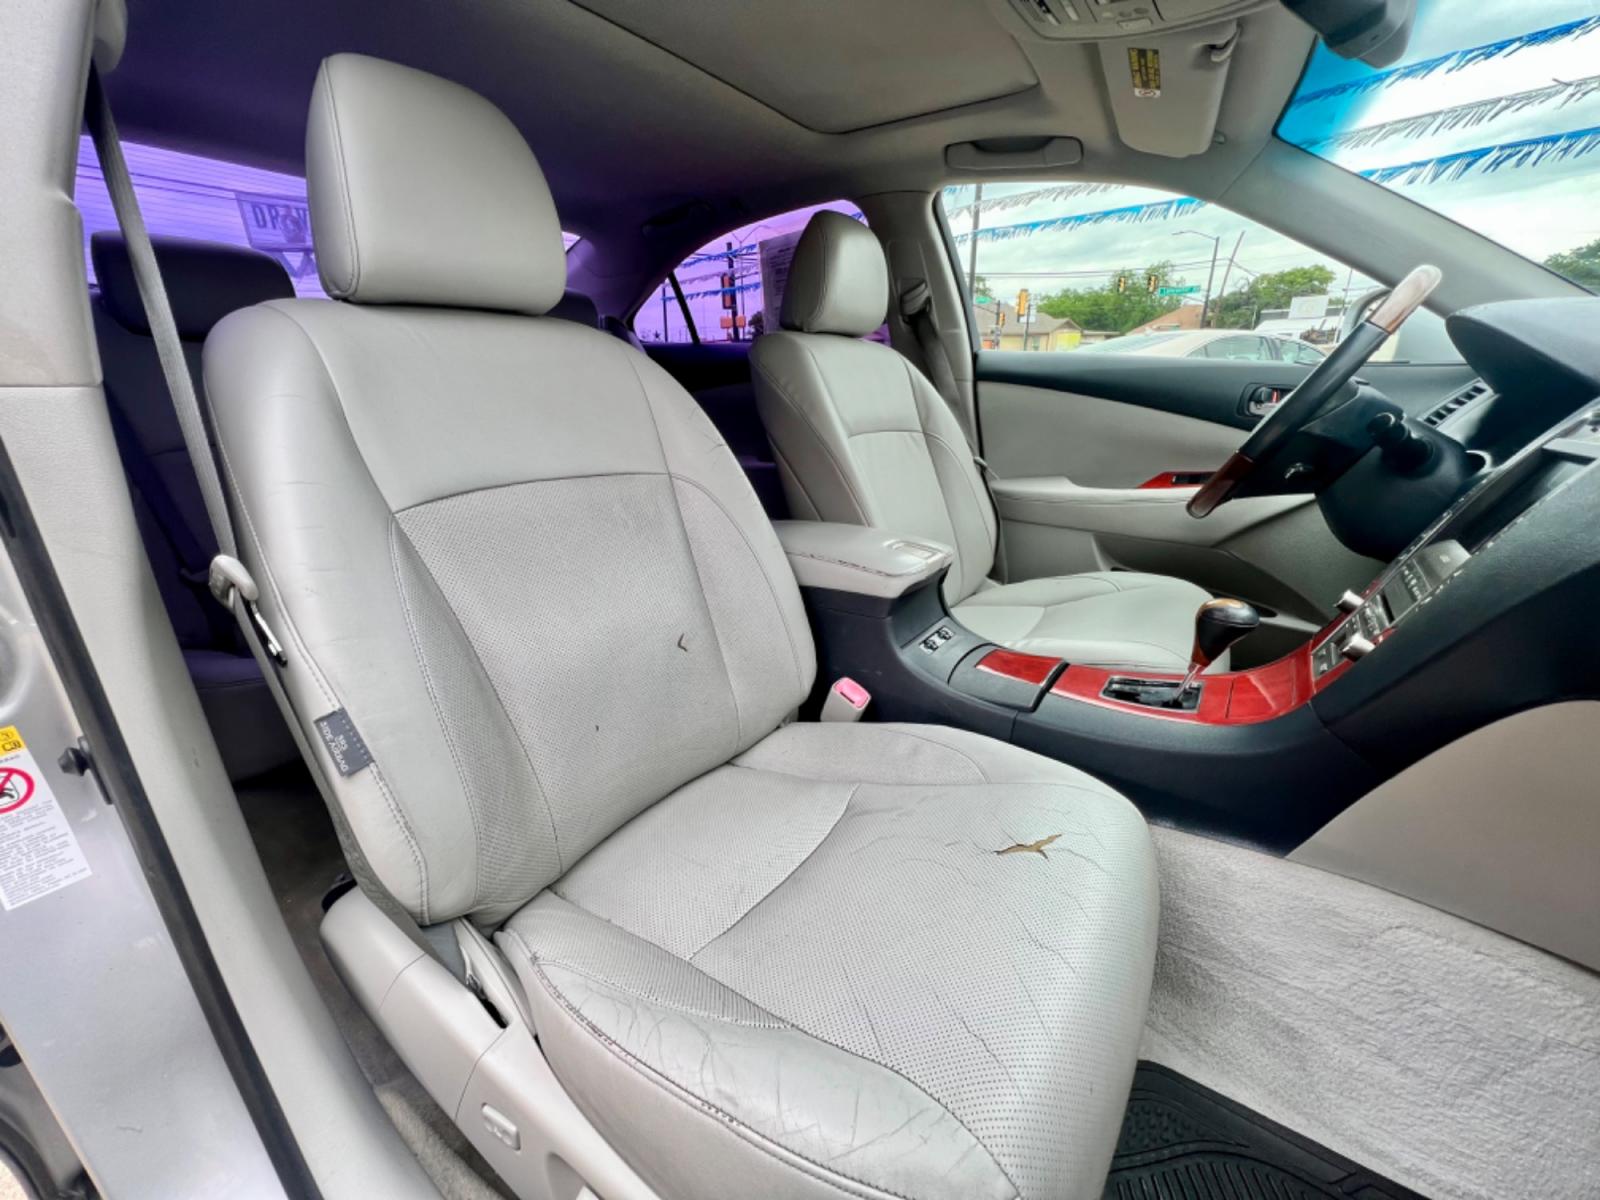 2007 SILVER LEXUS ES 350 BASE (JTHBJ46G072) , located at 5900 E. Lancaster Ave., Fort Worth, TX, 76112, (817) 457-5456, 0.000000, 0.000000 - CASH CAR ONLY, NO FINANCING AVAILABLE. THIS 2007 LEXUS ES 350 BASE 4 DOOR SEDAN RUNS AND DRIVES GREAT. IT IS EQUIPPED WITH A CD PLAYER, AM/FM RADIO AND AN AUX PORT. THE TIRES ARE IN GOOD CONDITION AND STILL HAVE TREAD LEFT ON THEM. THIS CAR WILL NOT LAST SO ACT FAST! Call or text Frances at 68 - Photo #16